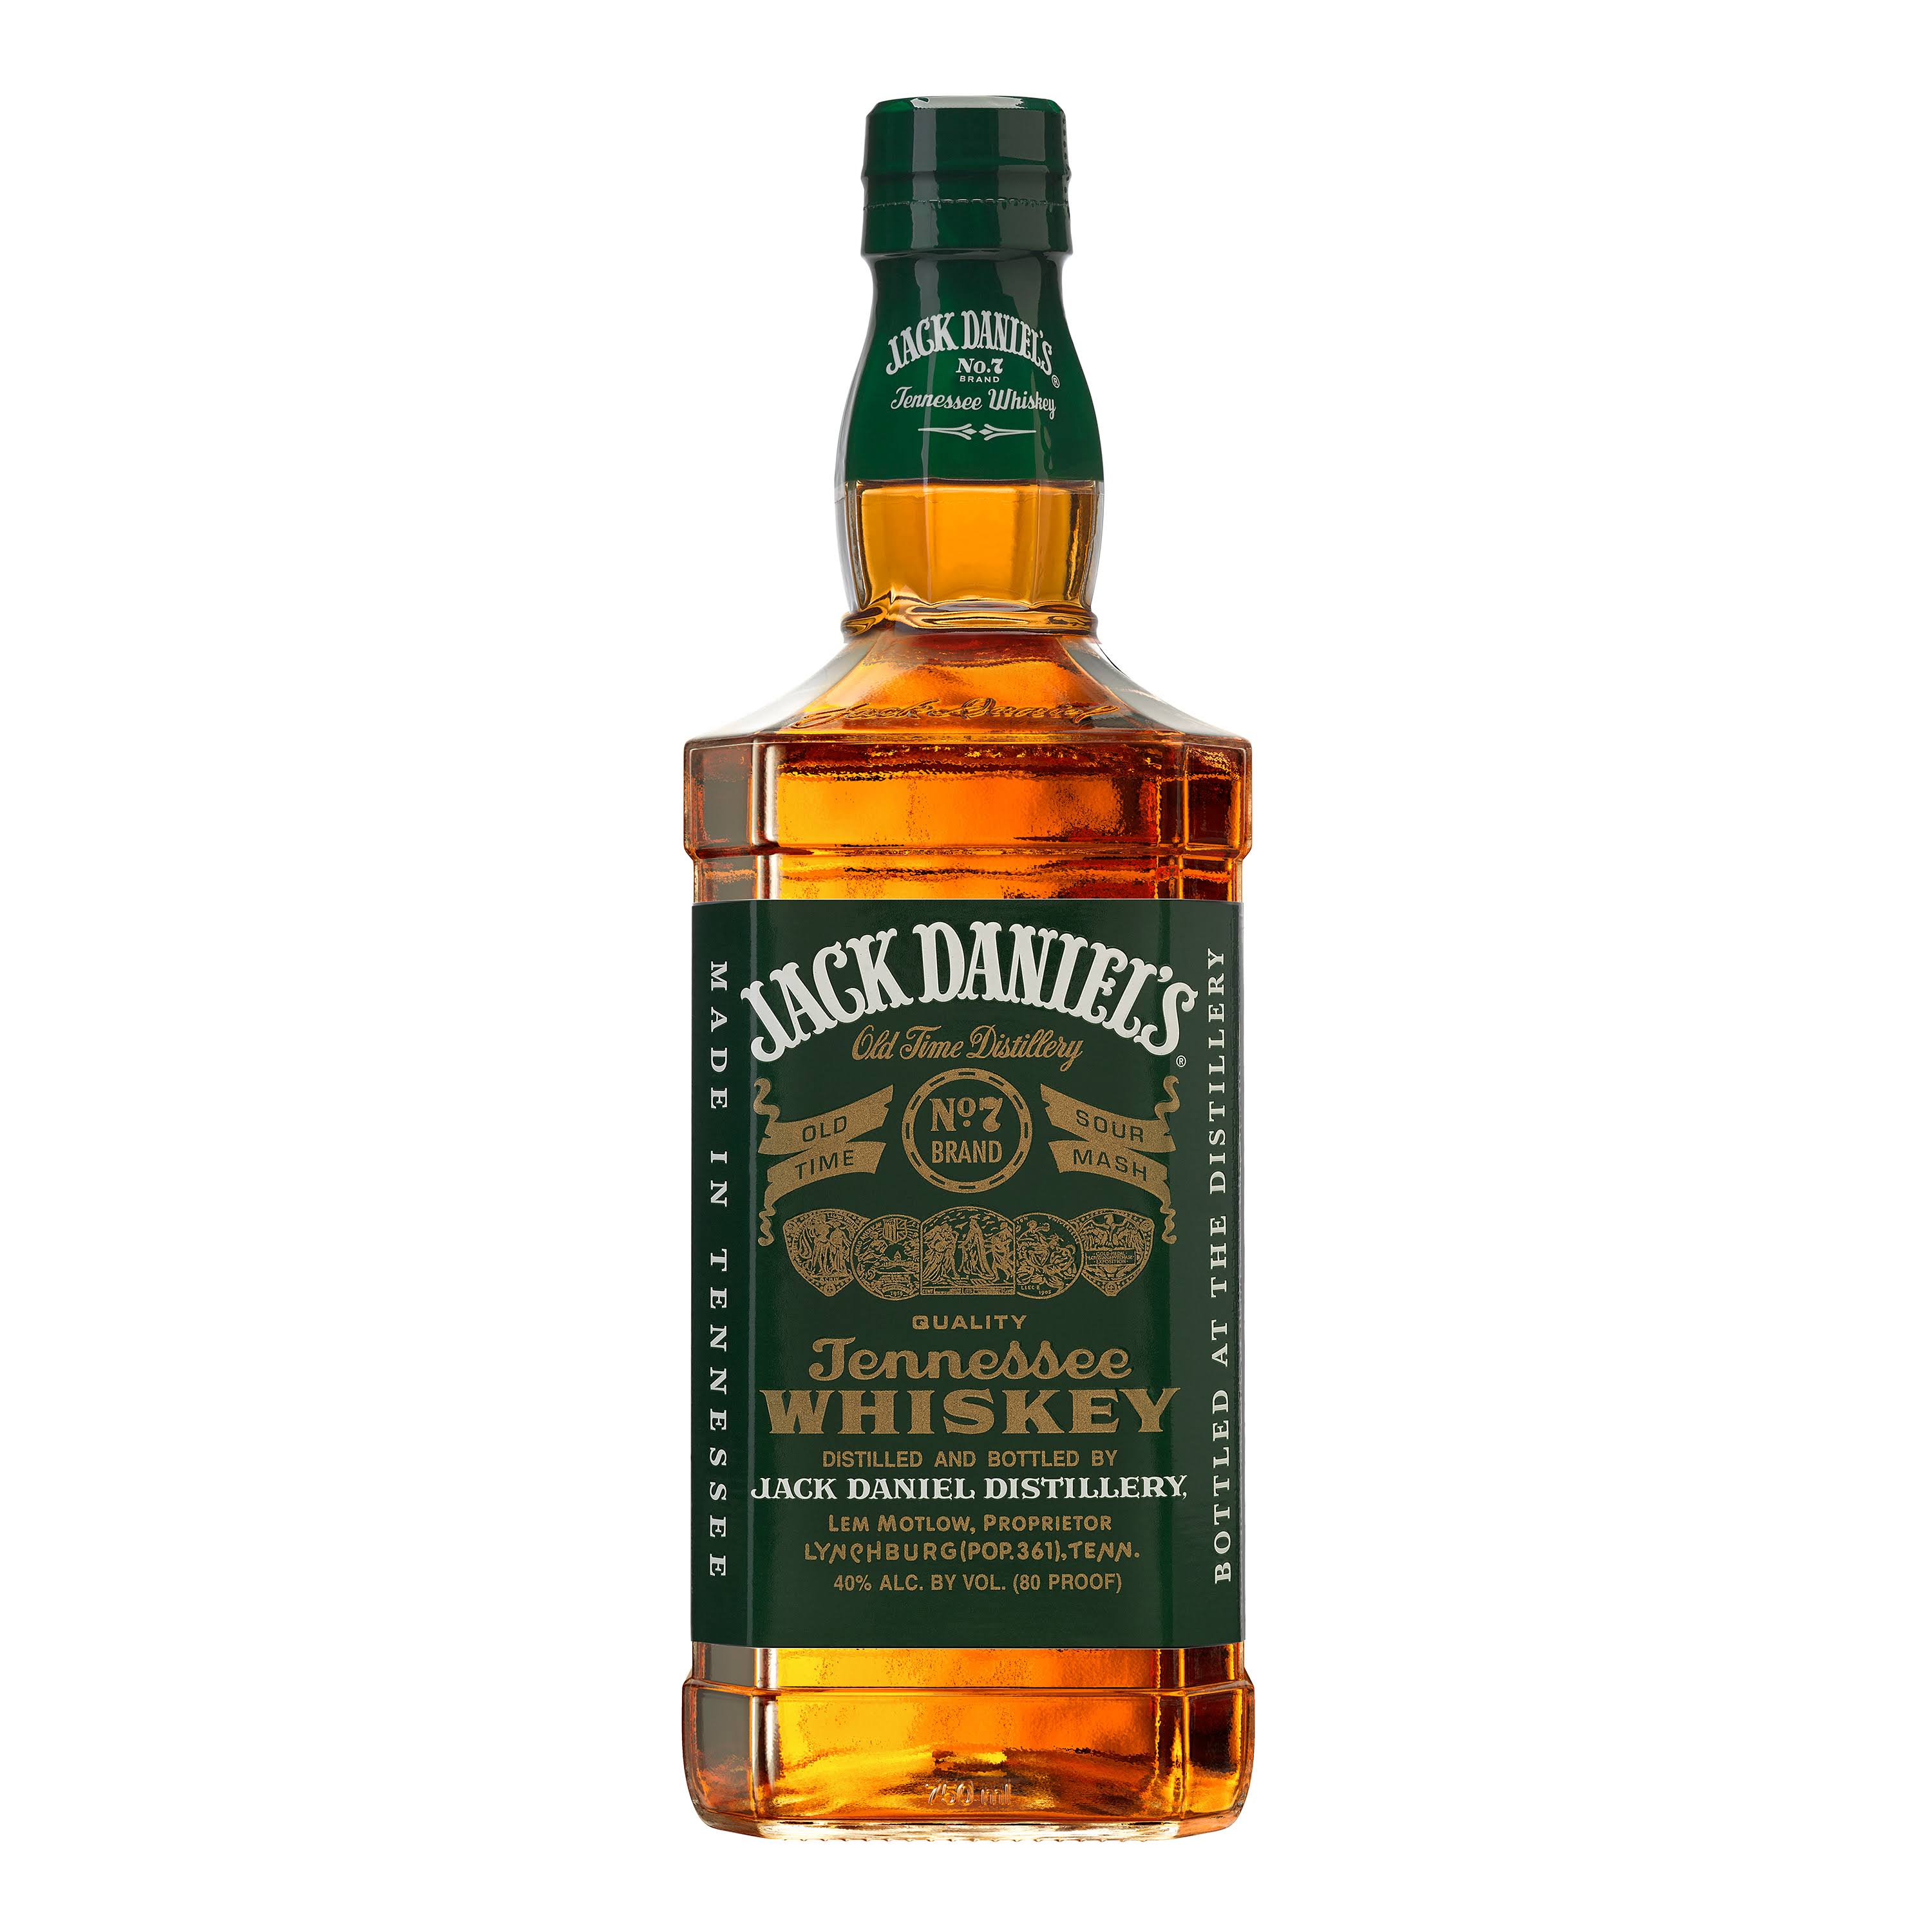 Jack Daniel's Green Label Tennessee Whiskey